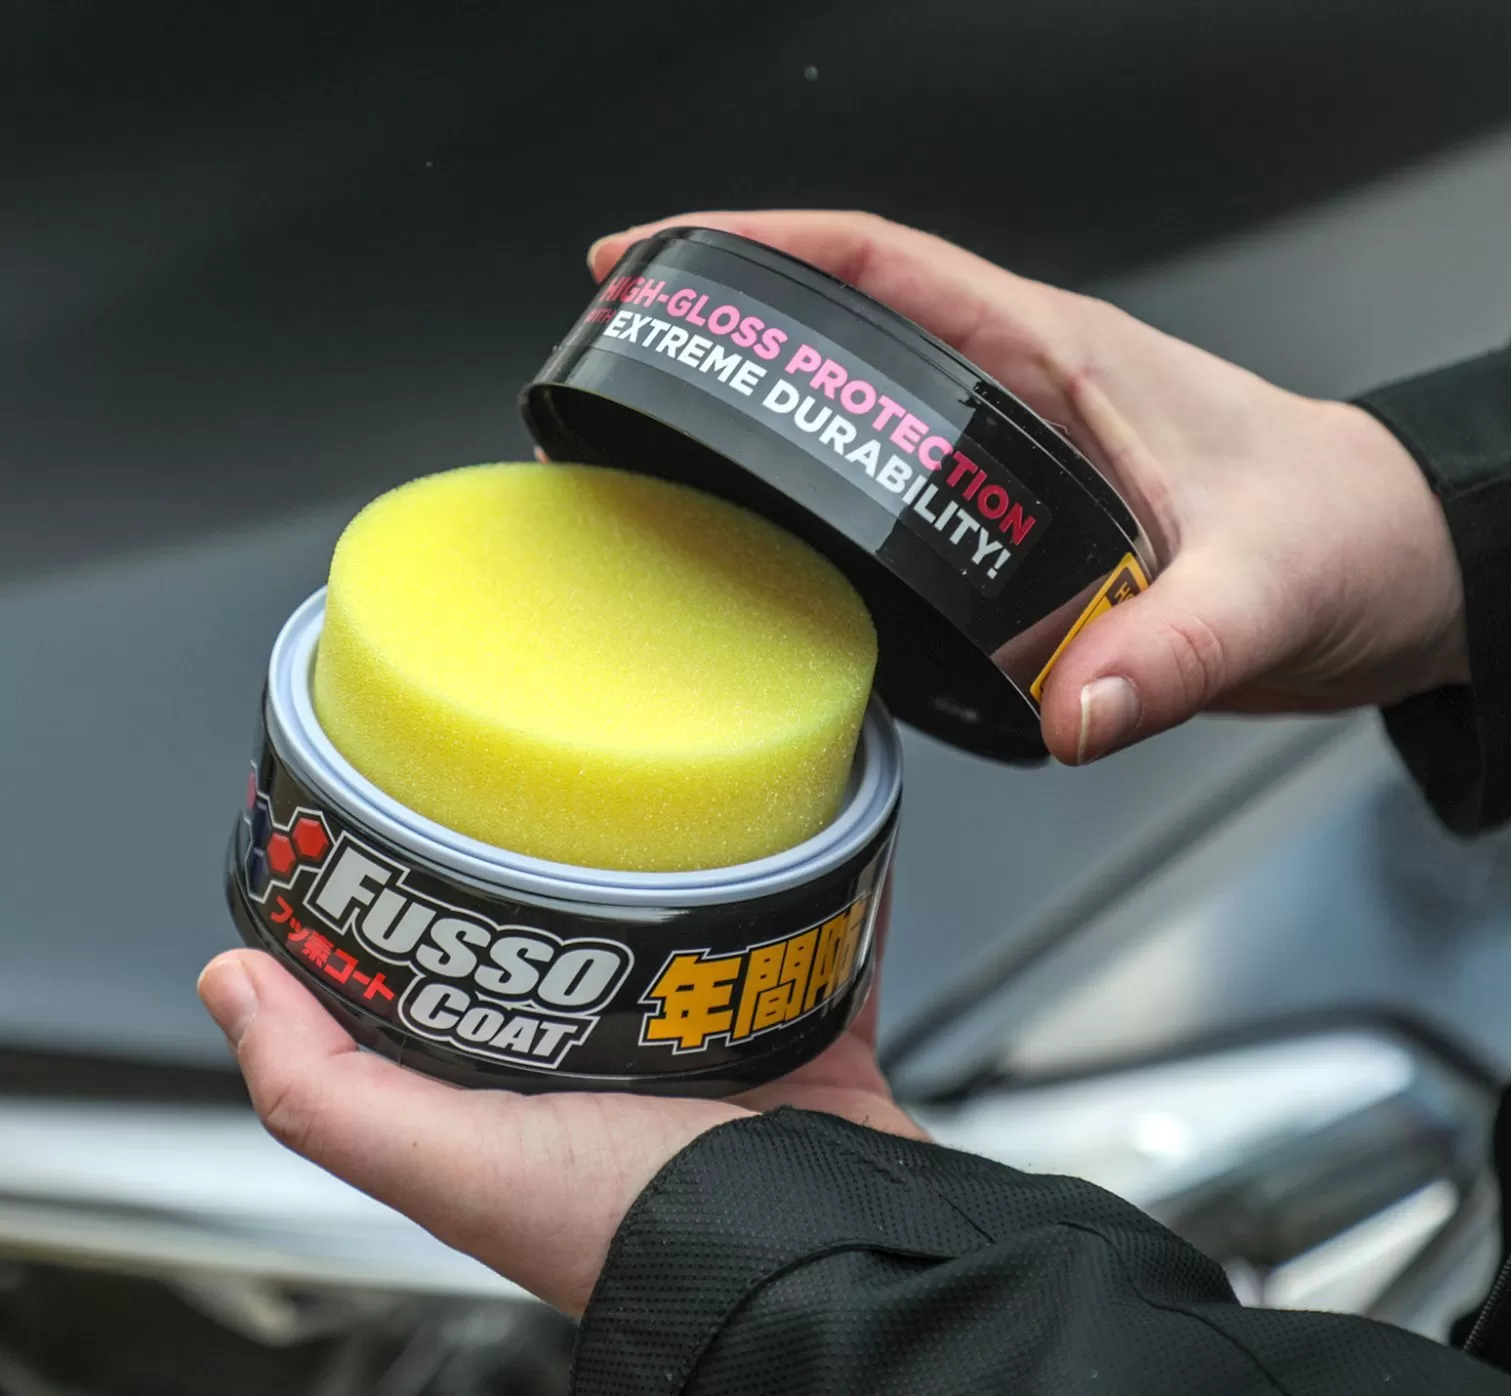 Fusso Coat Soft 99 NEW Dark 200g -  - Car care products